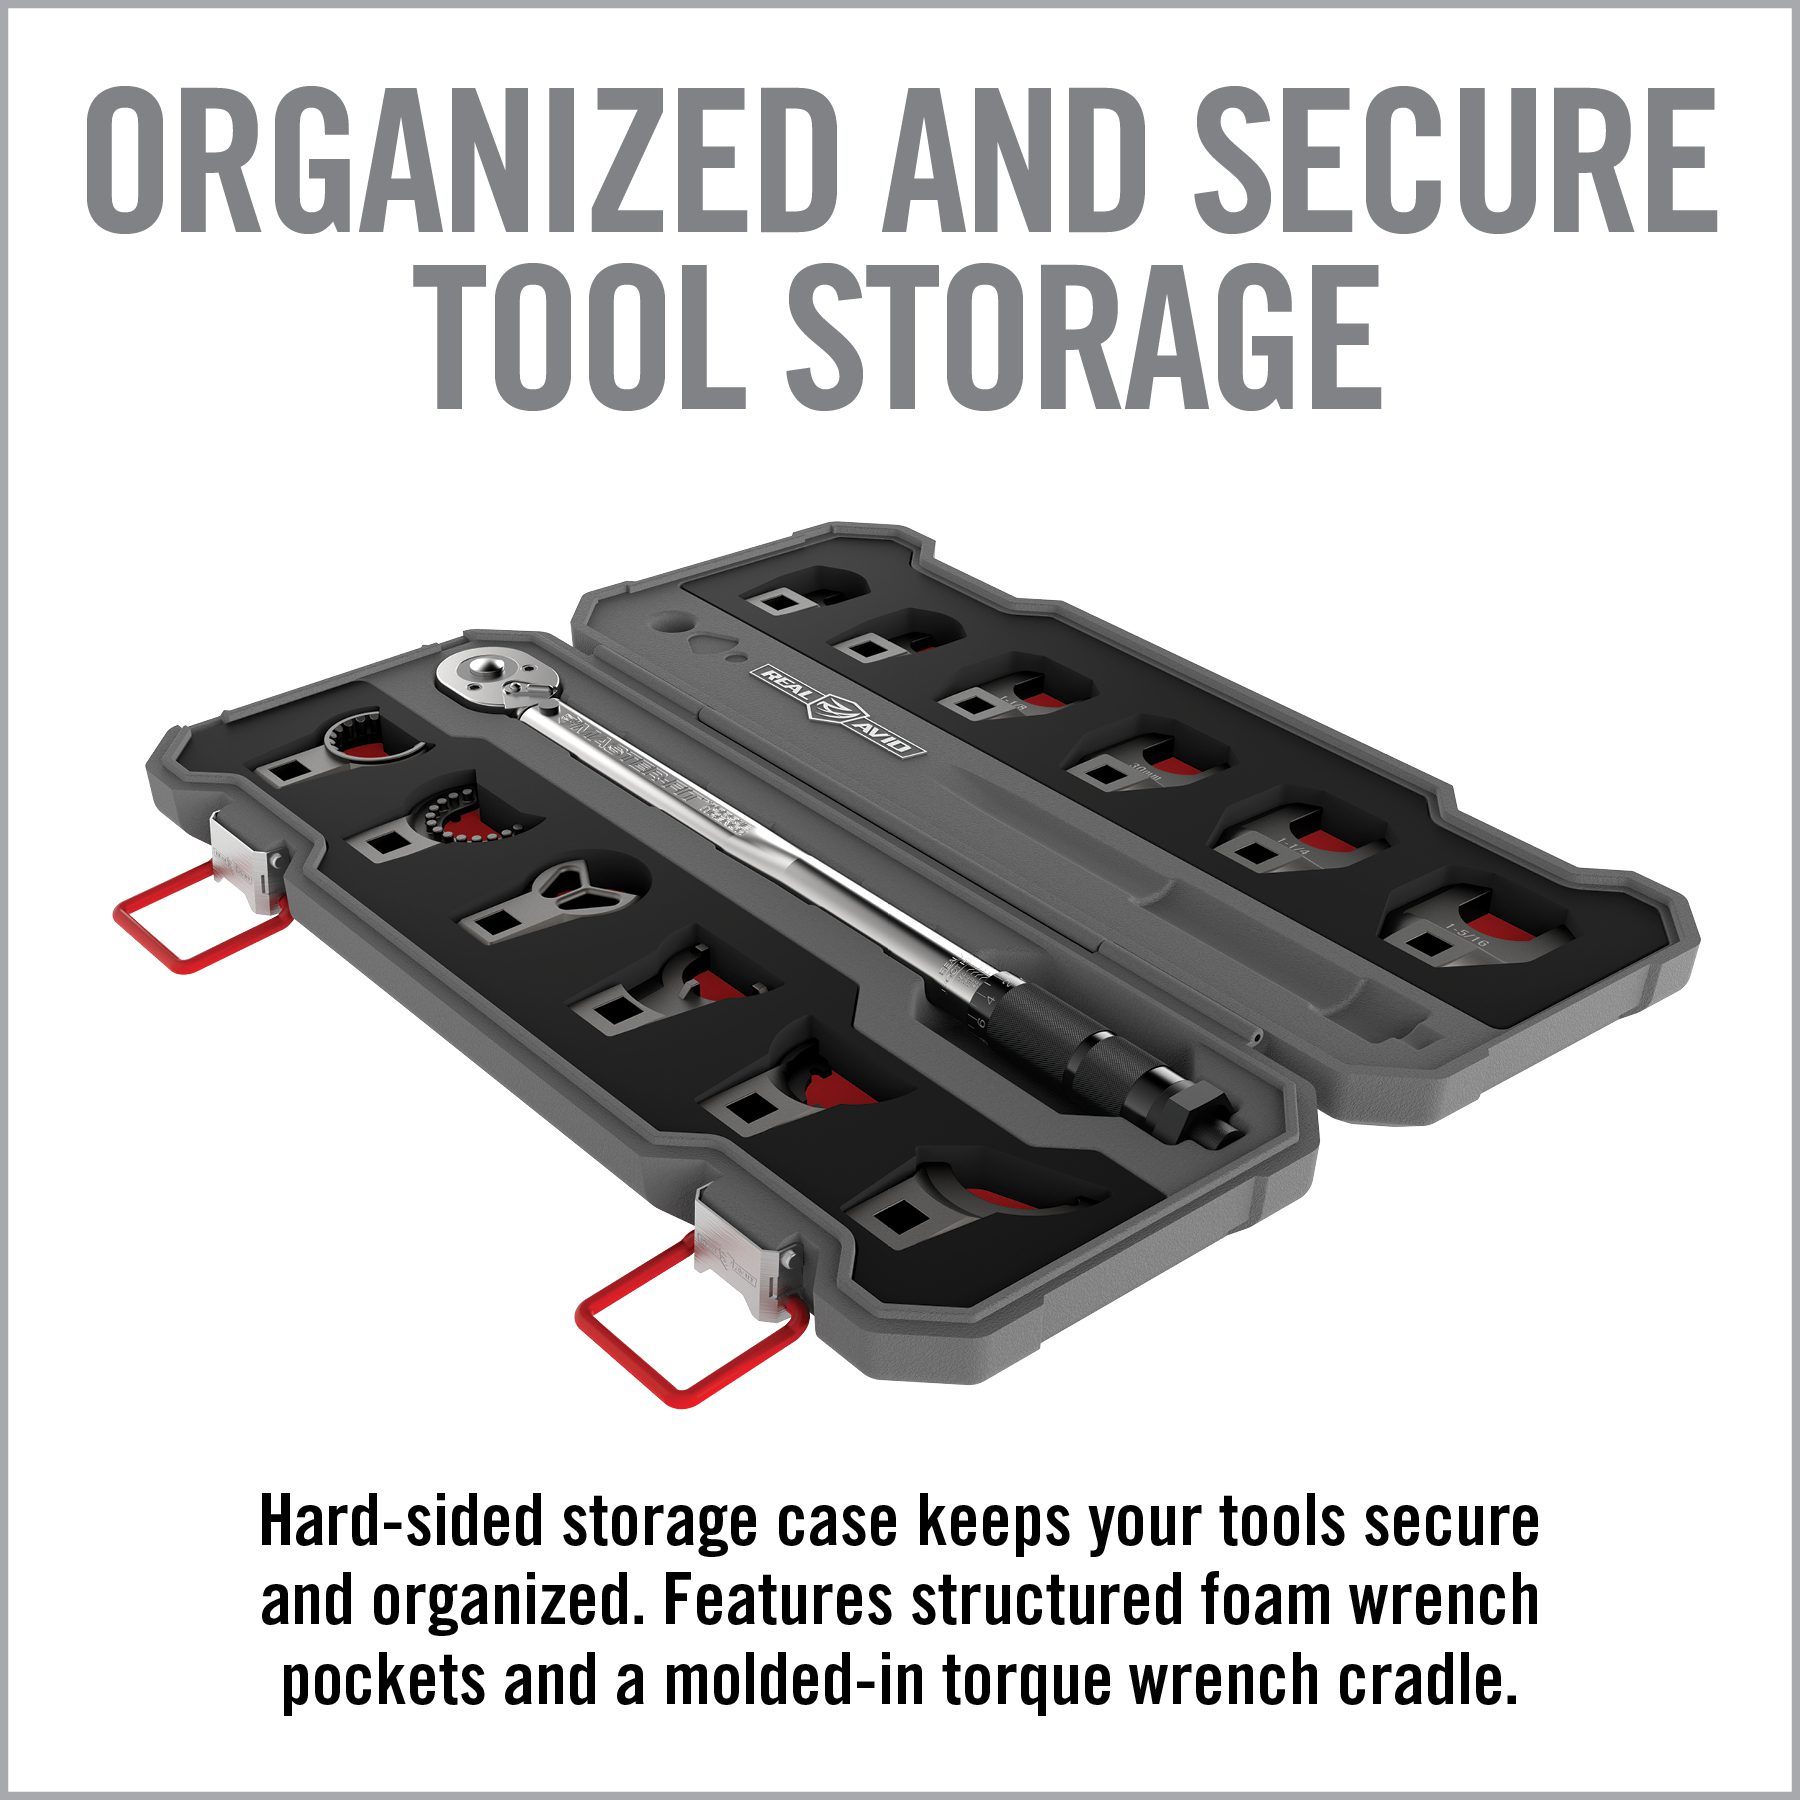 two tool storage cases with tools in them